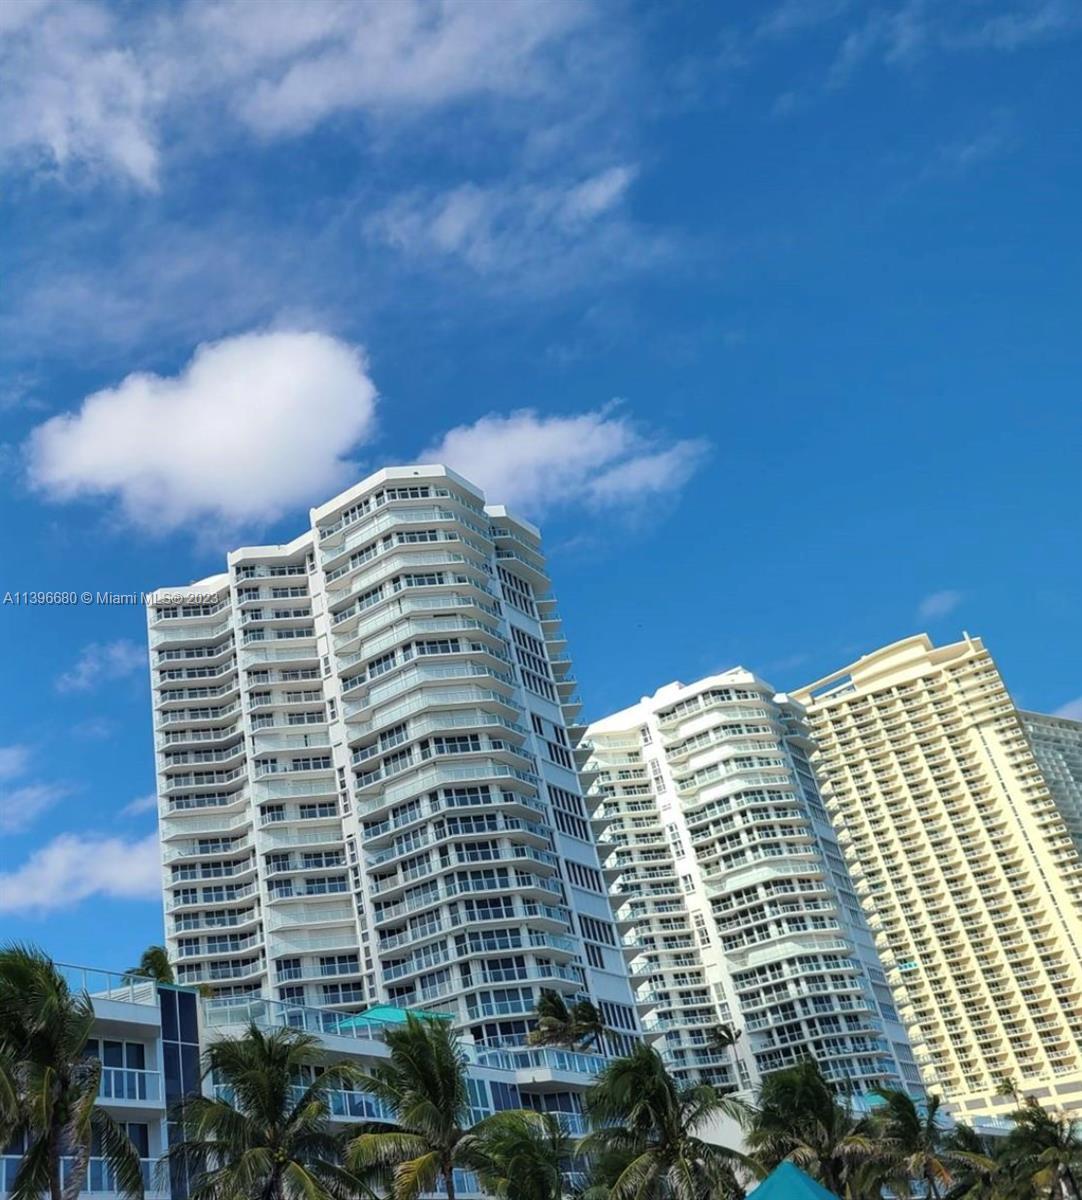 PRICE JUST REDUCED FOR A QUICK SALE. MOTIVATED SELLERS. Beautiful Ocean front spacious condo in the 